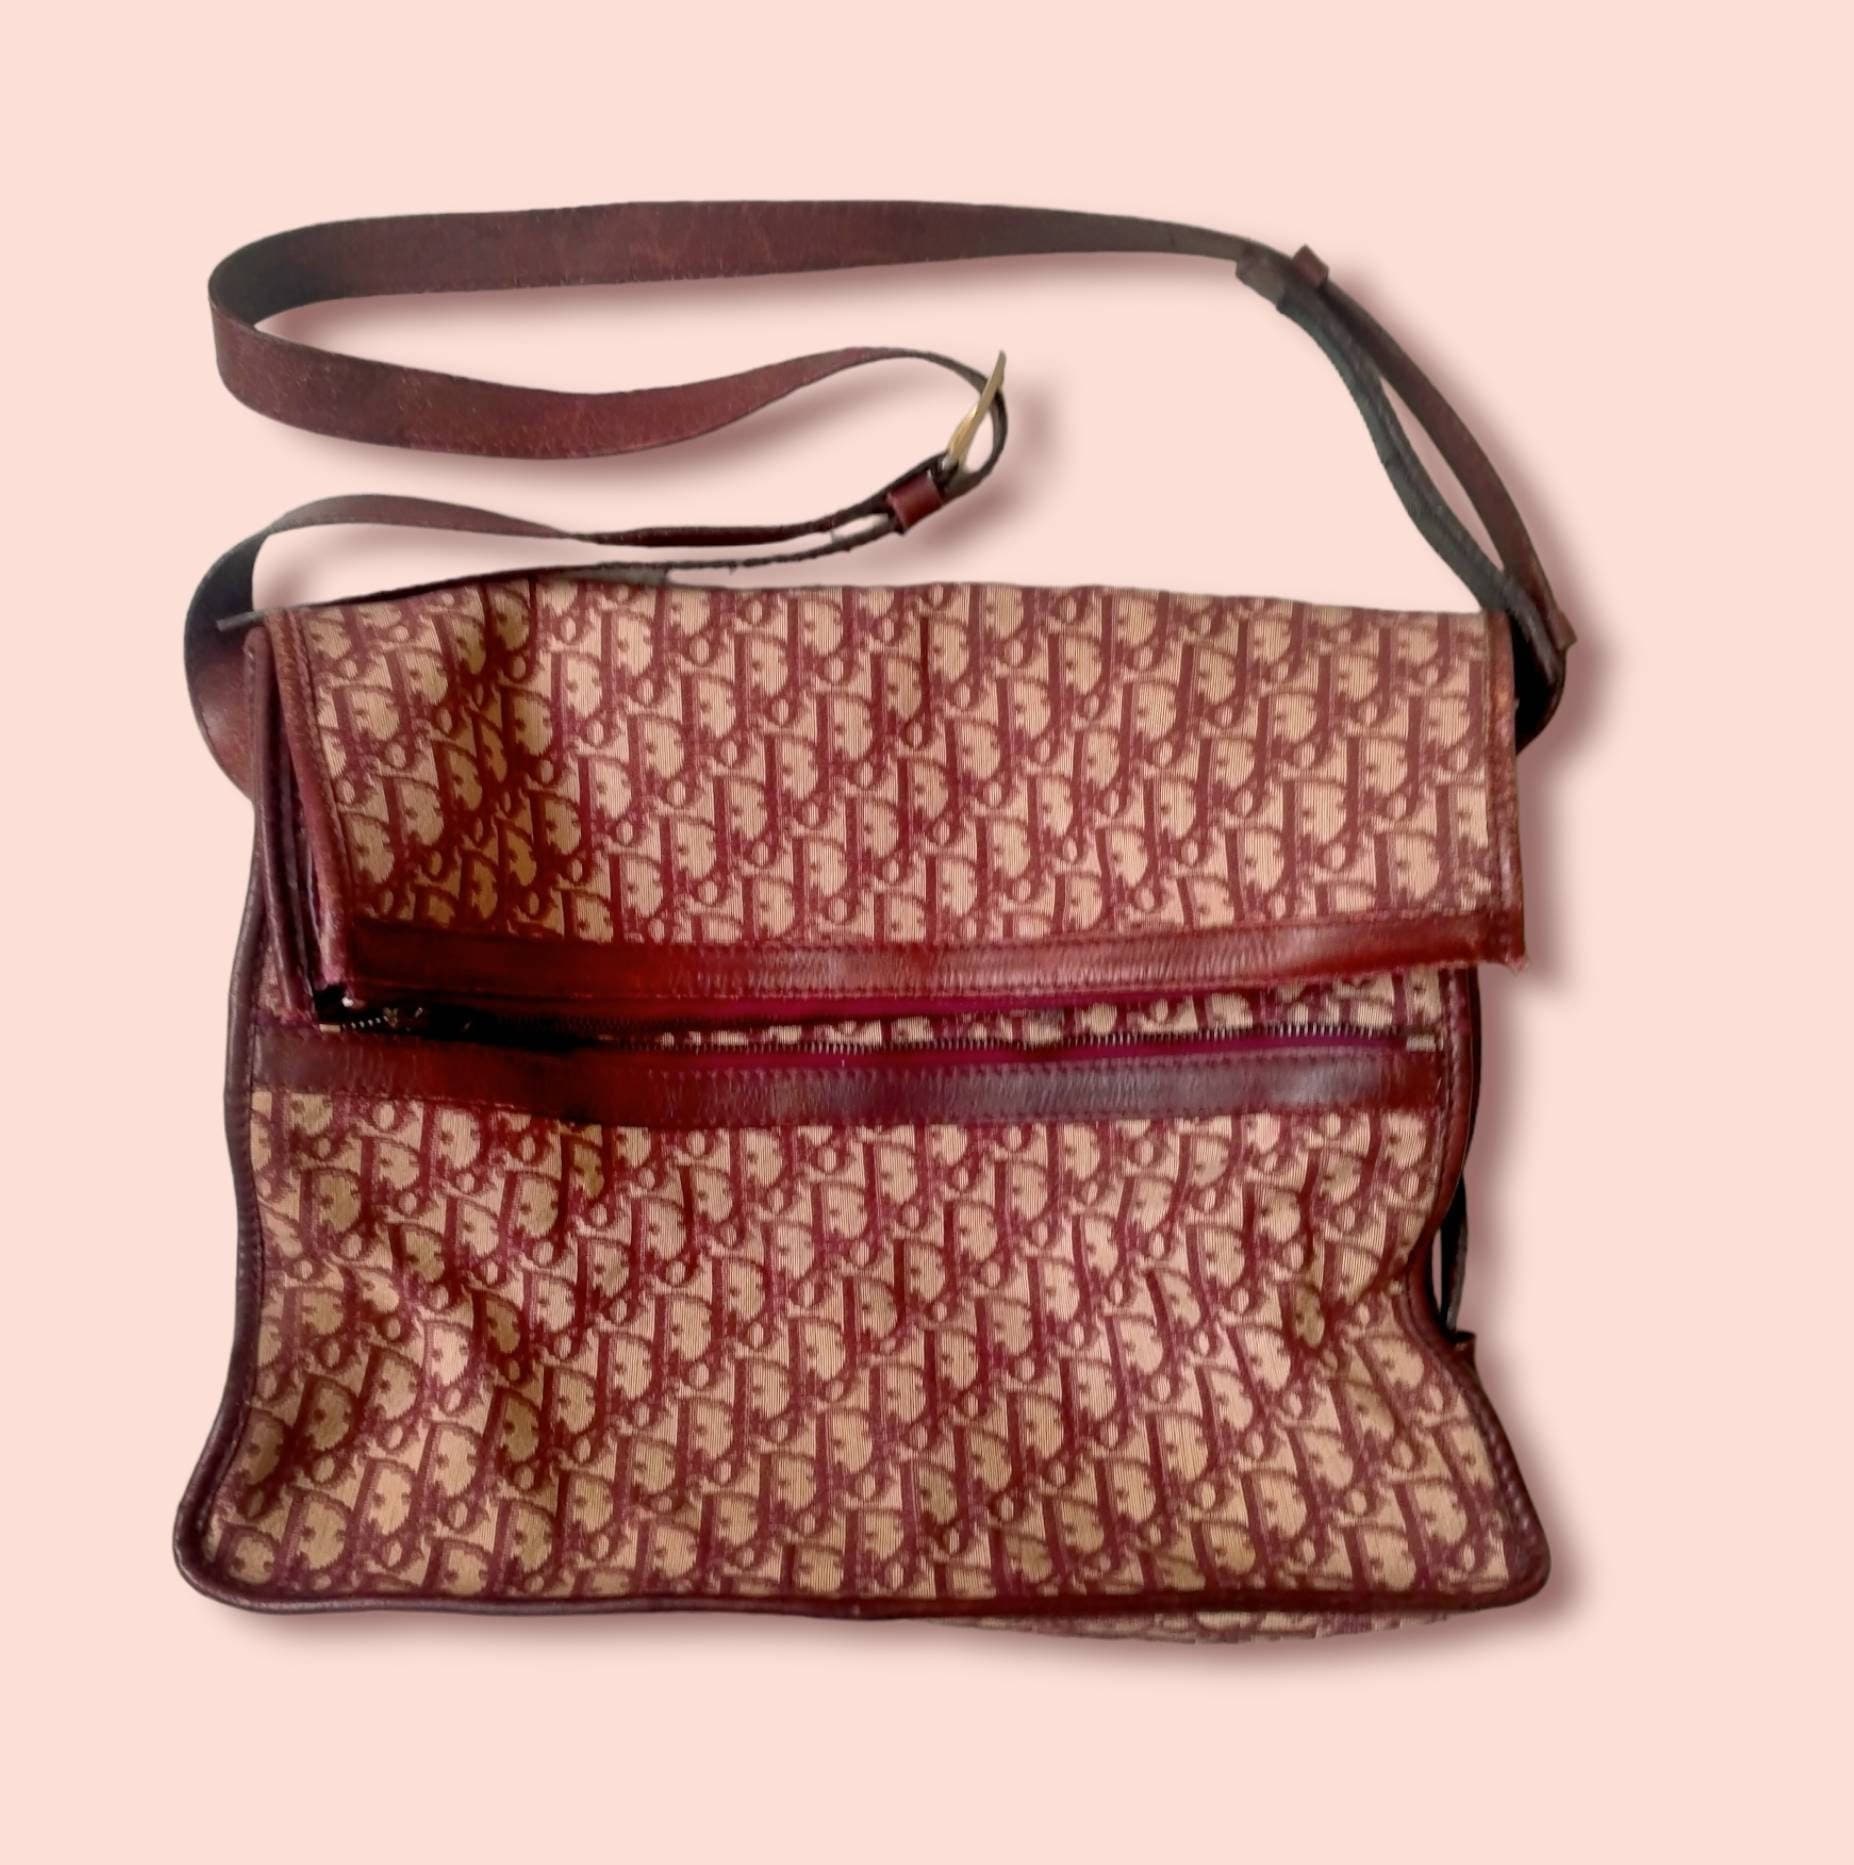 Vintage Dior bags - Our second-hand / second-hand luxury Dior bags